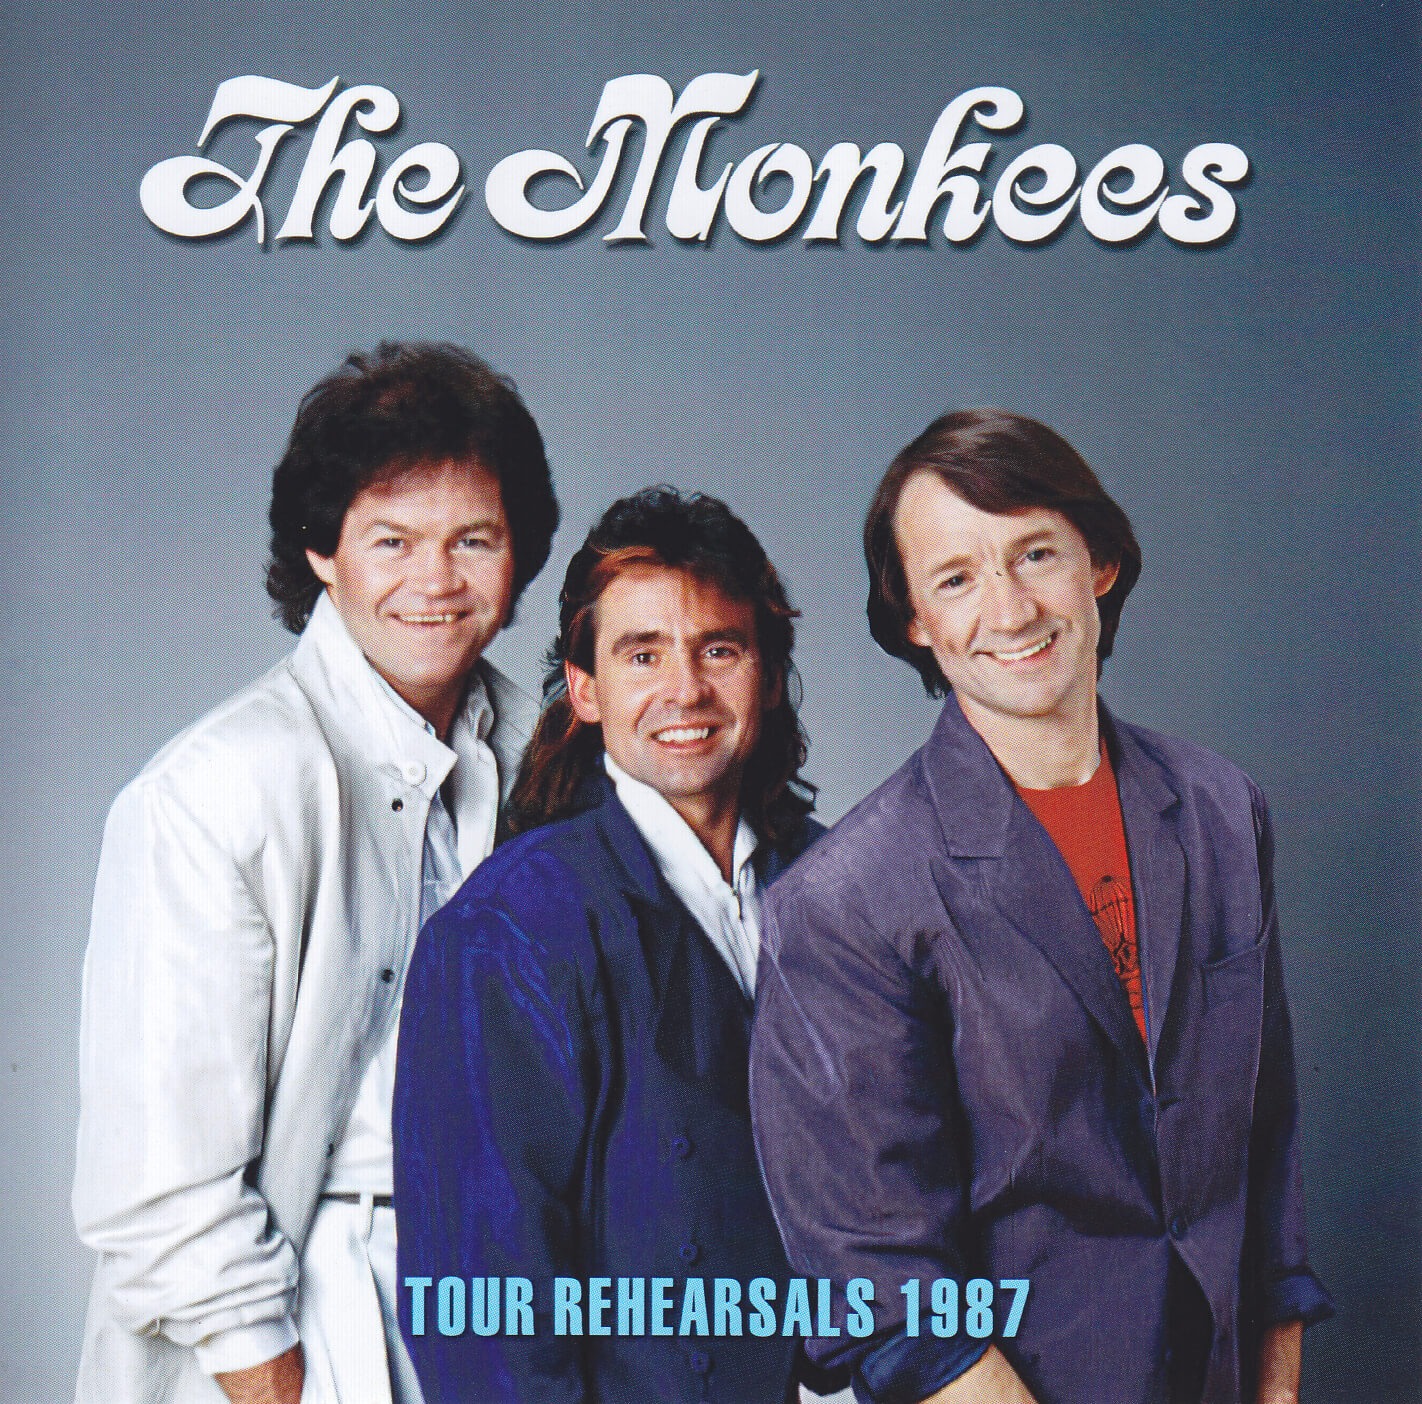 Monkees / Tour Rehearsals 1987 / 1CDR GiGinJapan